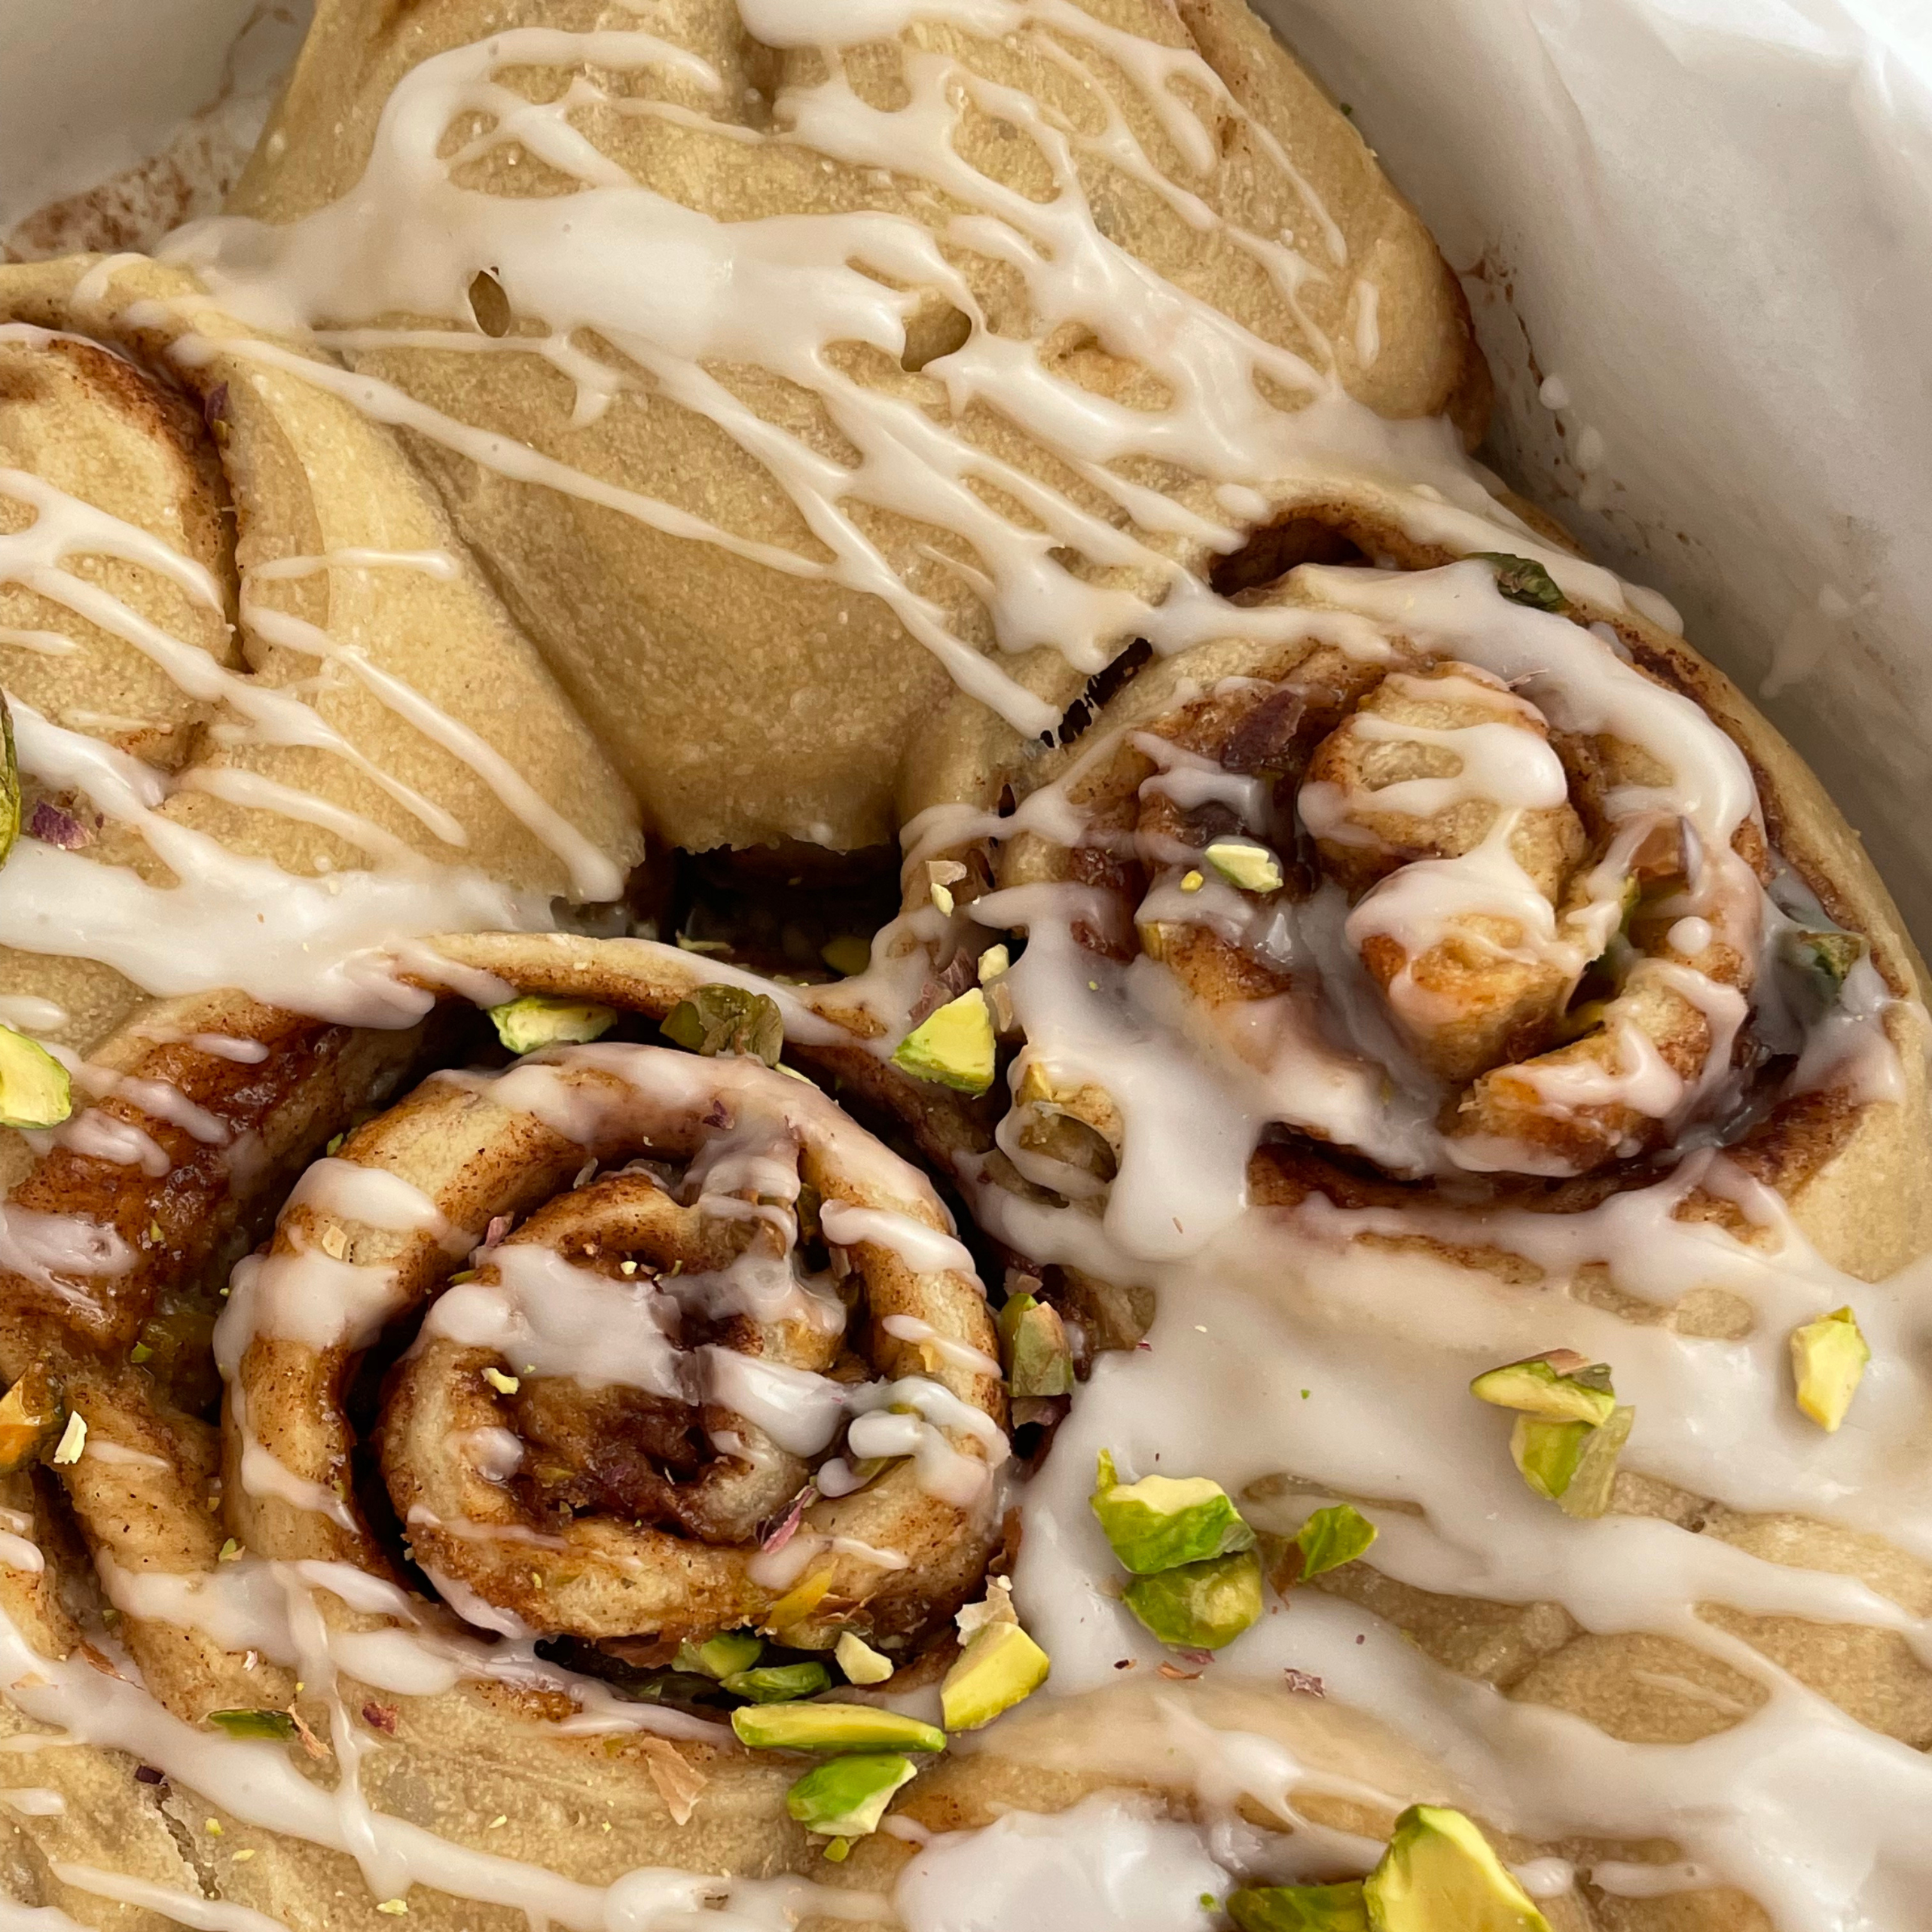 Pistachio Cinnamon Rolls So Good, You’ll Look Forward to Getting Out of Bed